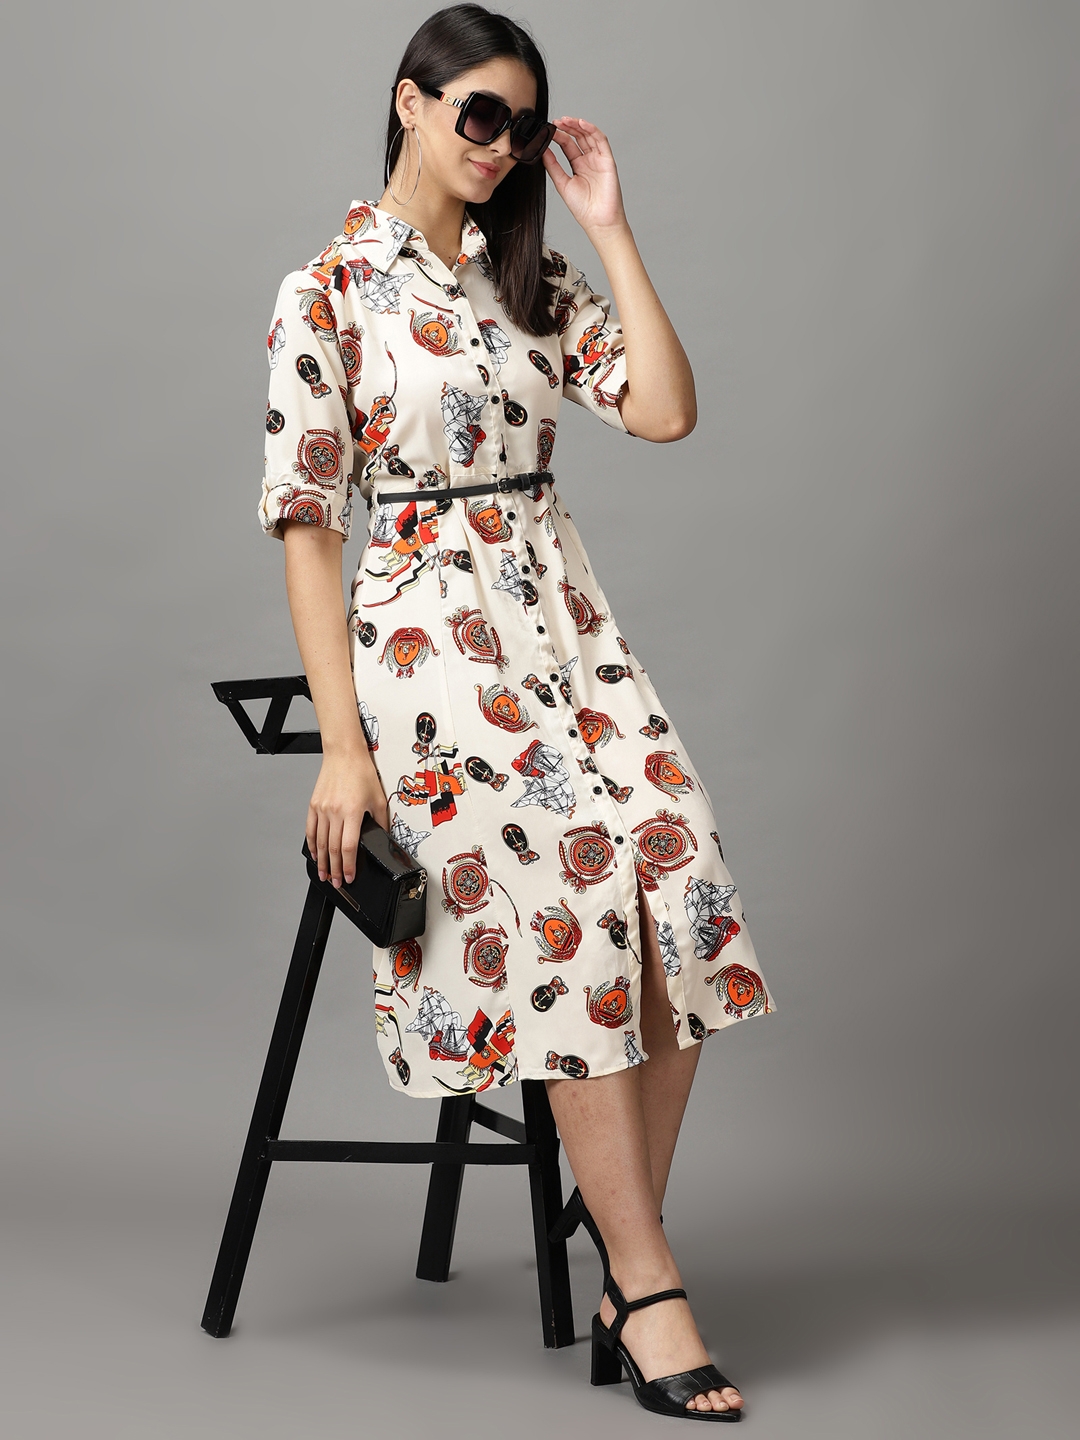 Women's Beige Polyester Printed Dresses